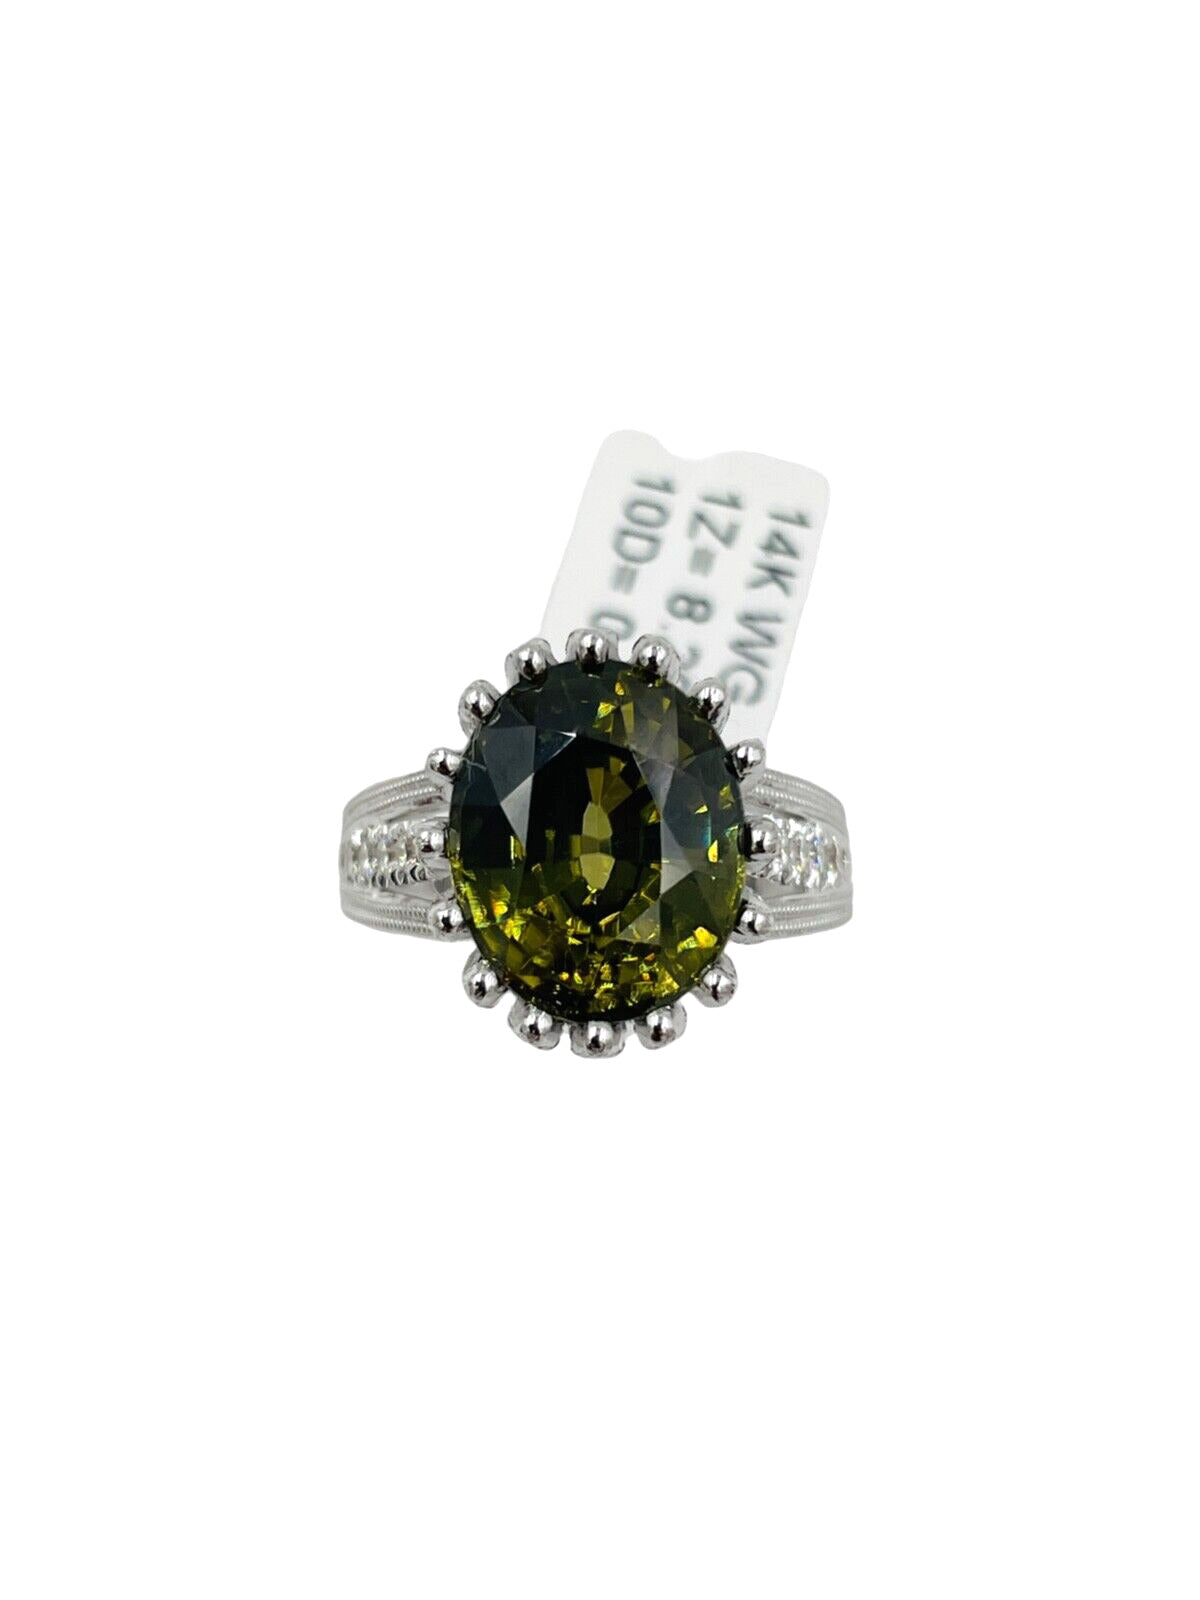 Stunning 8.20cts Natural Zircon and Diamond Cocktail Ring 14k White Gold